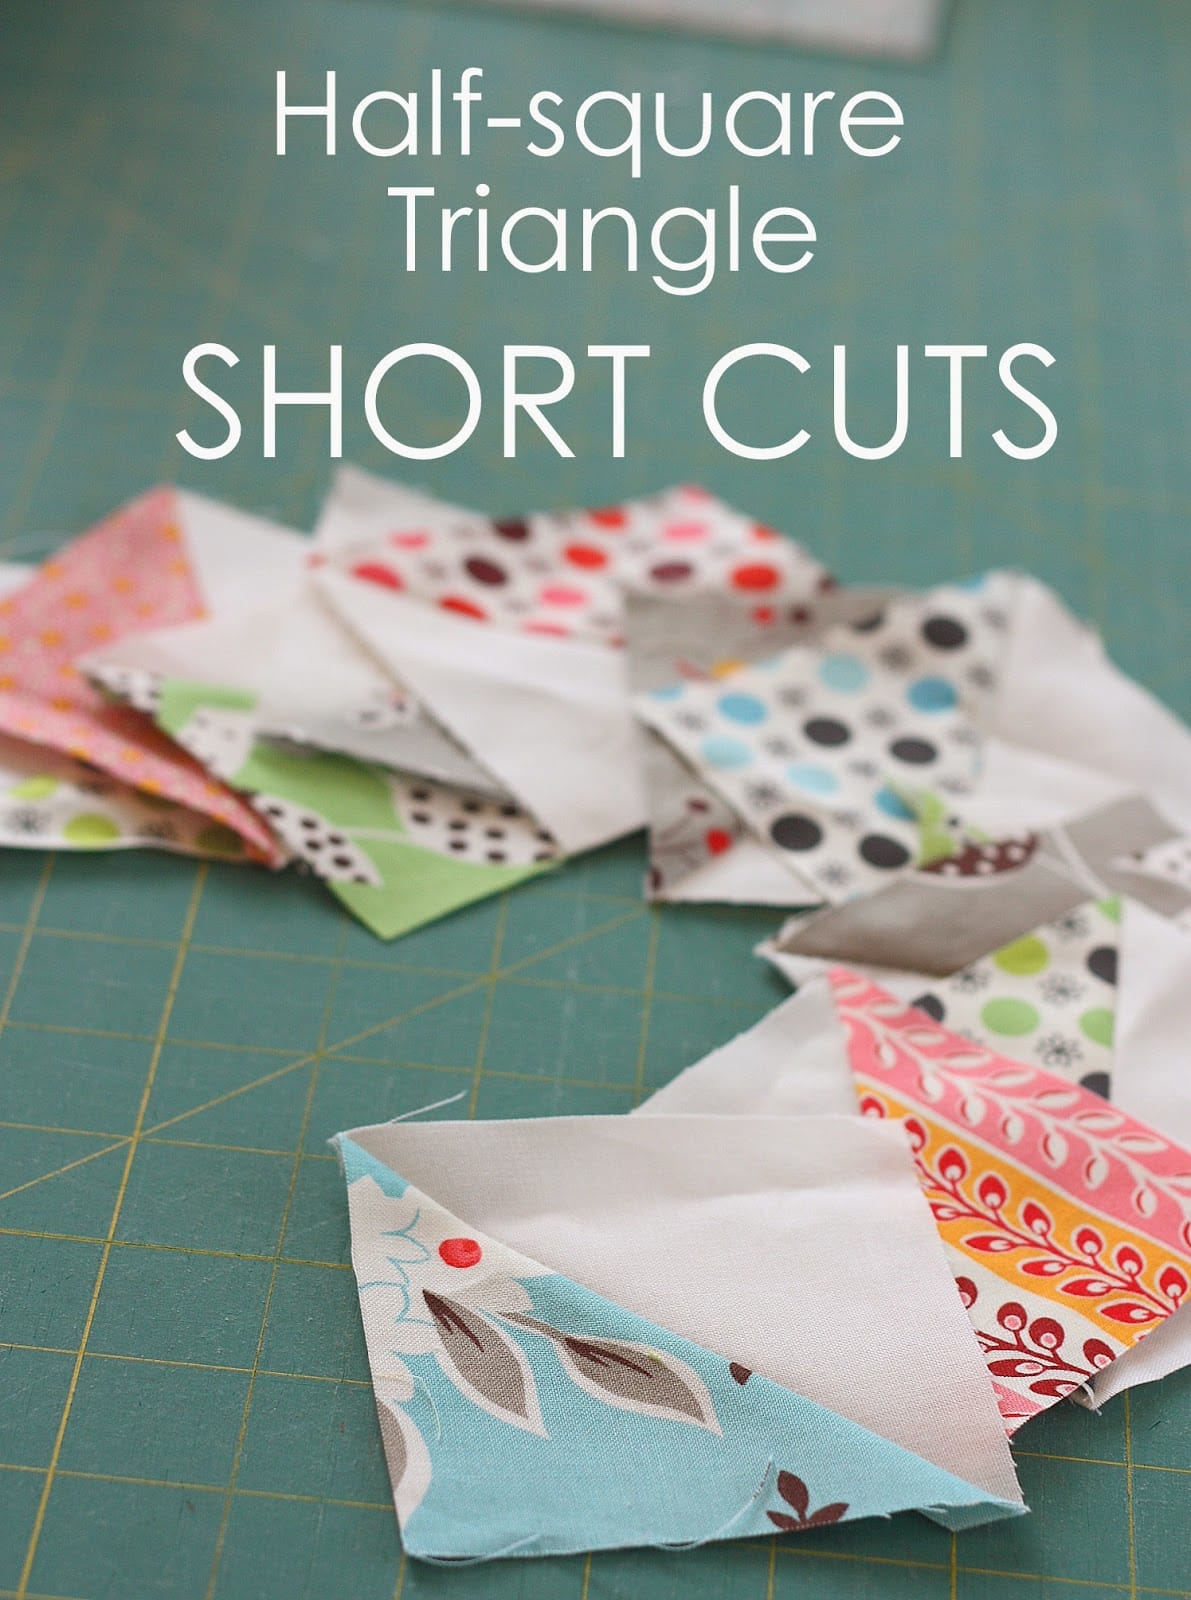 Half Square Triangle Tips and Short Cuts from diaryofaquilter.com